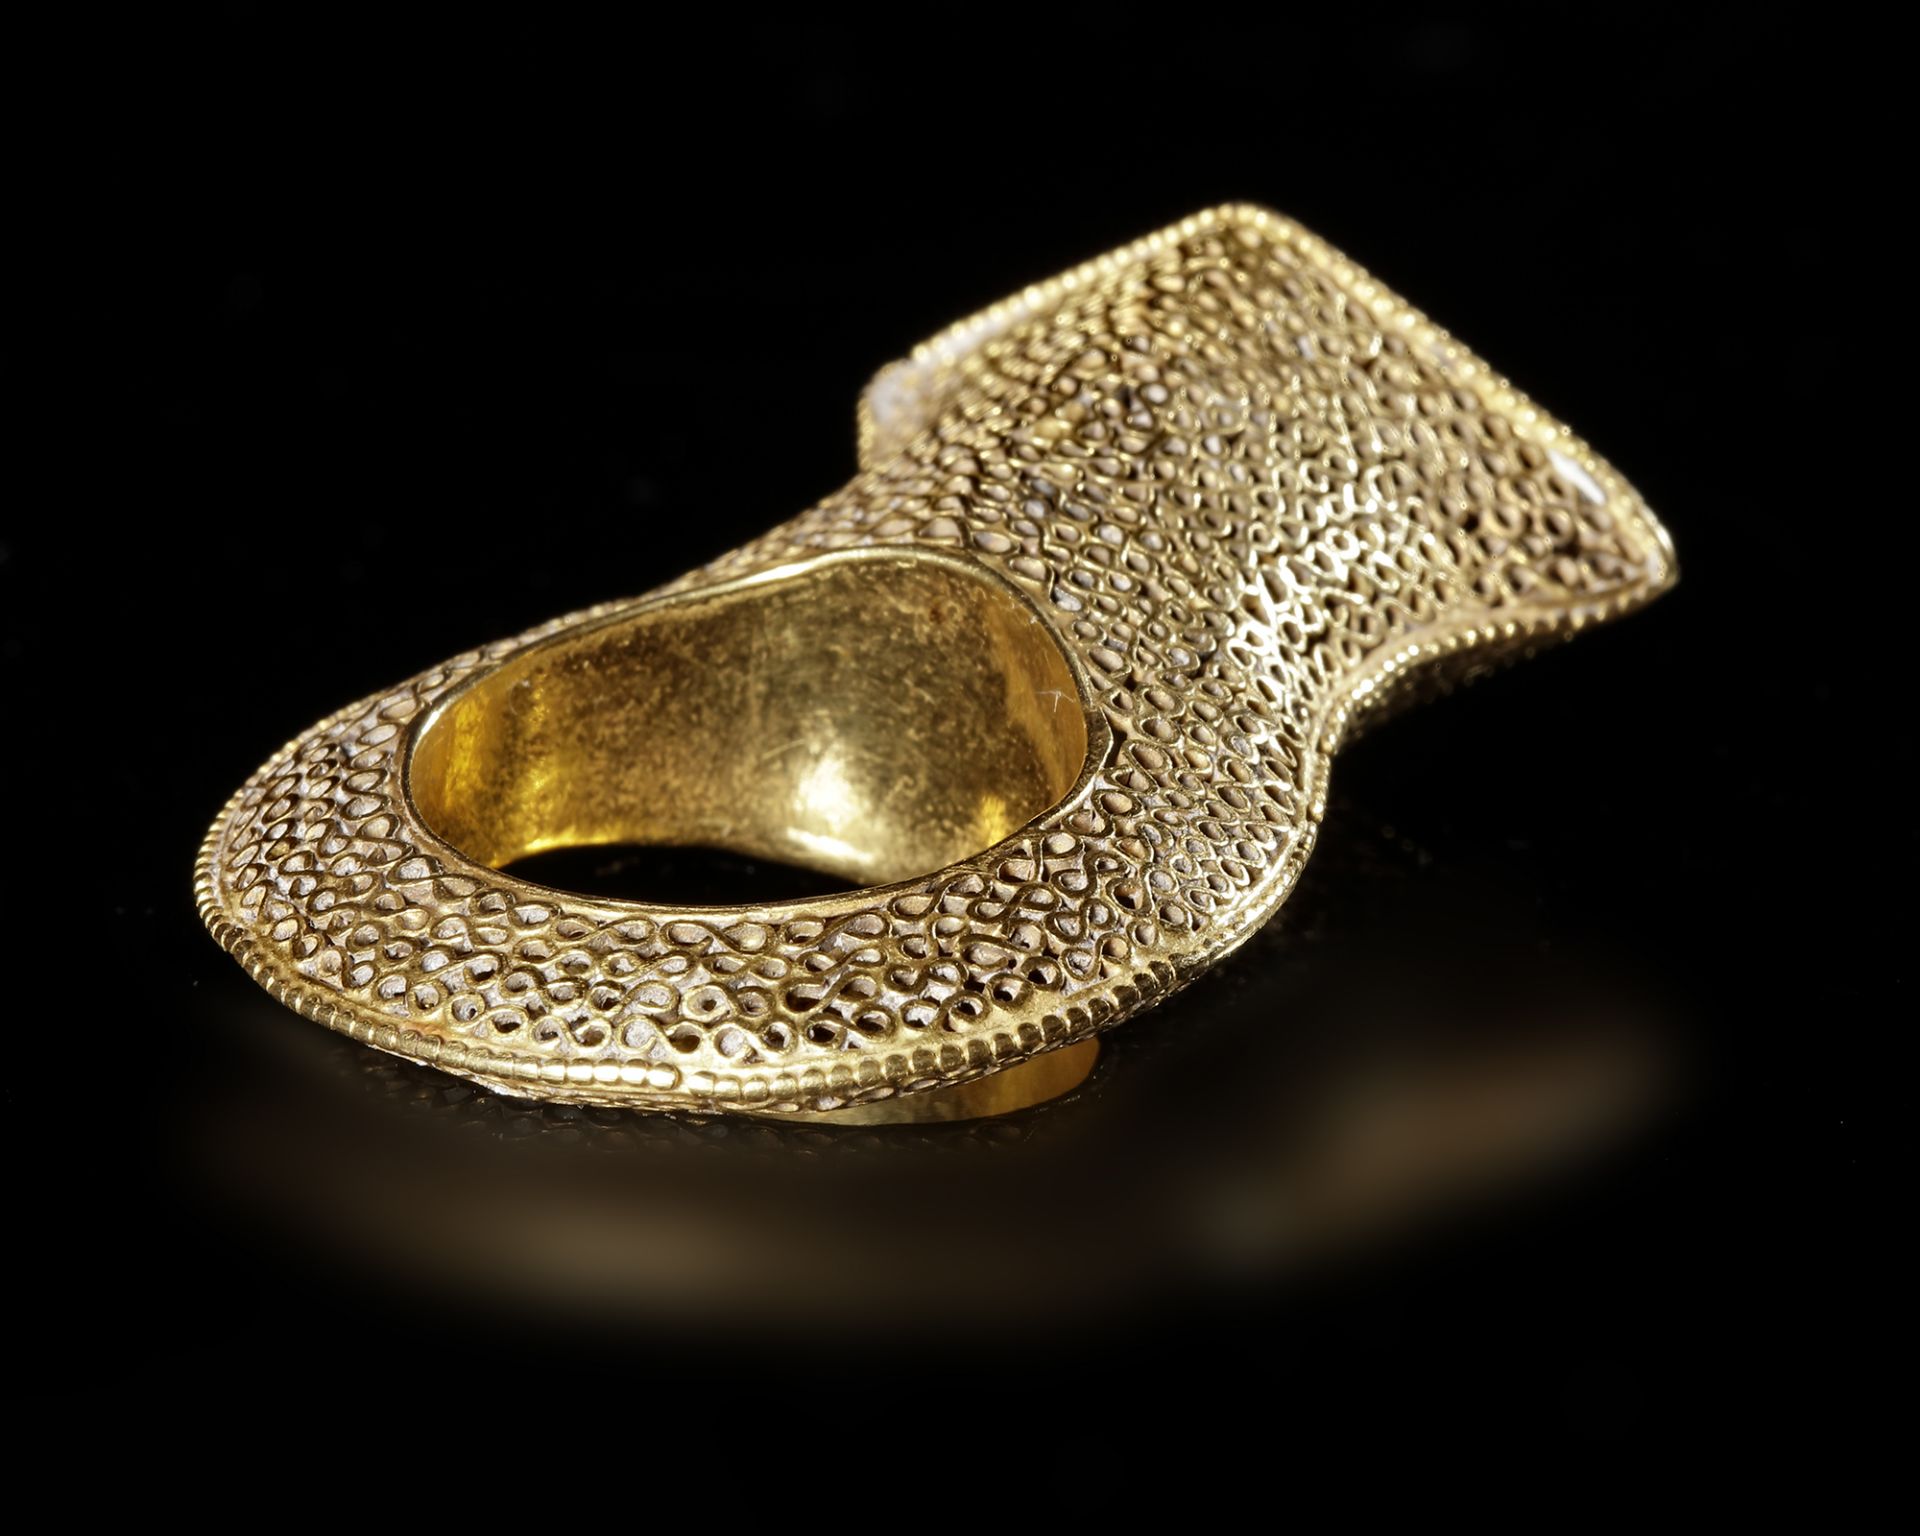 A MAGNIFICENT EARLY ISLAMIC GOLD RING, NEAR EAST 10TH-11TH CENTURY - Bild 5 aus 5